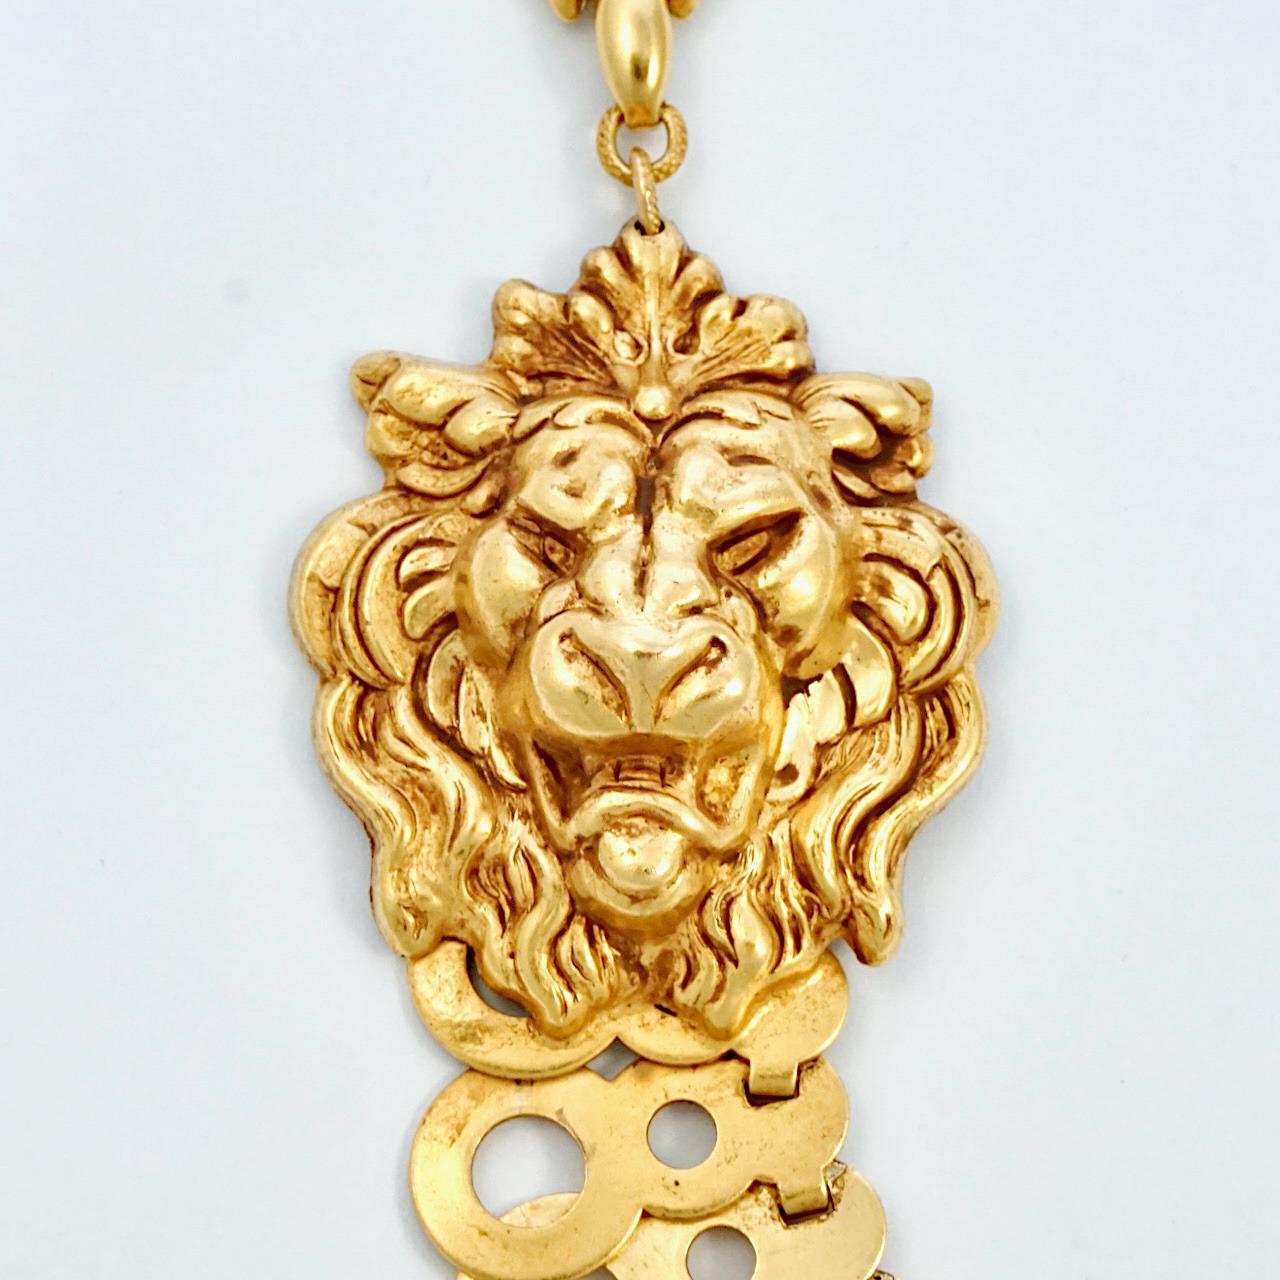 Fabulous Askew London antiqued gold plated necklace featuring two lion heads with filigree backs joined together by punched link chain. The back has pip link chain with a lovely bee and flower clasp. Measuring necklace length 52.5 cm / 20.6